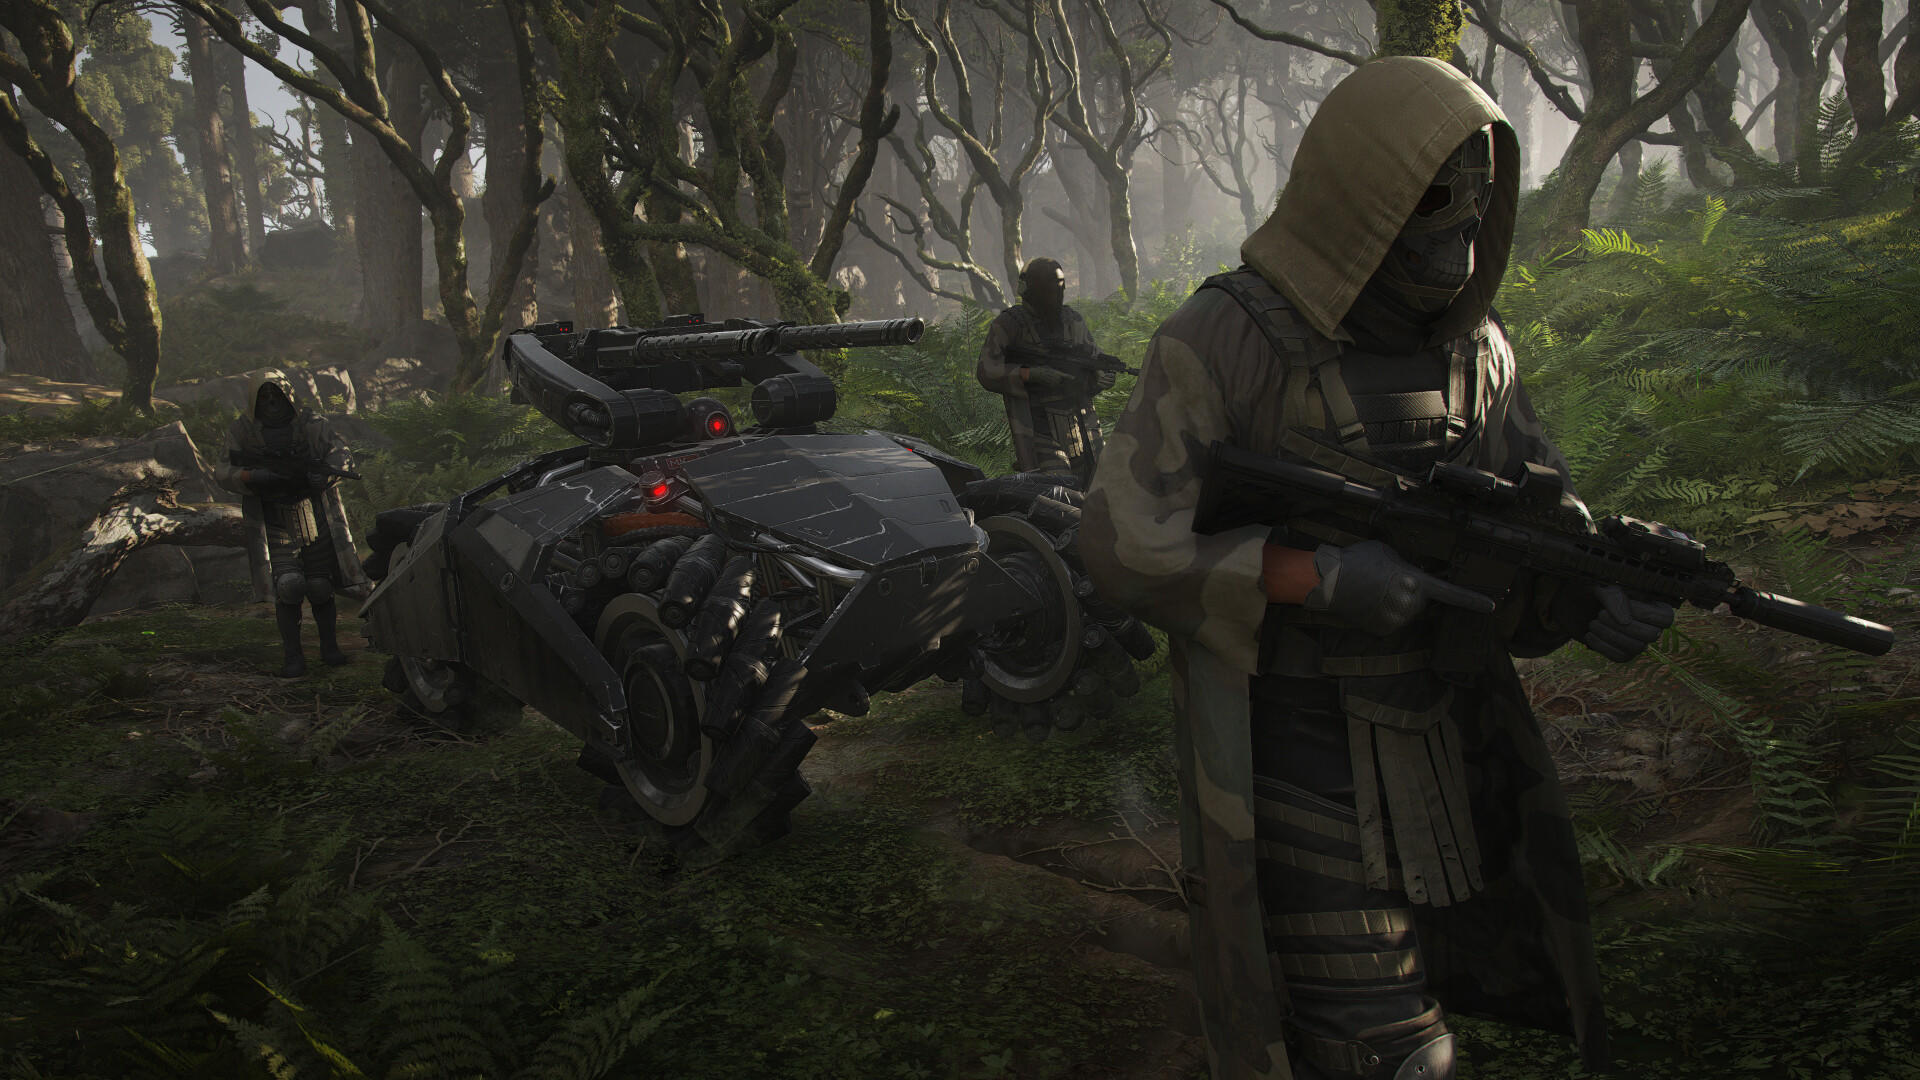 Screenshot 1 of Điểm dừng Ghost Recon® của Tom Clancy 